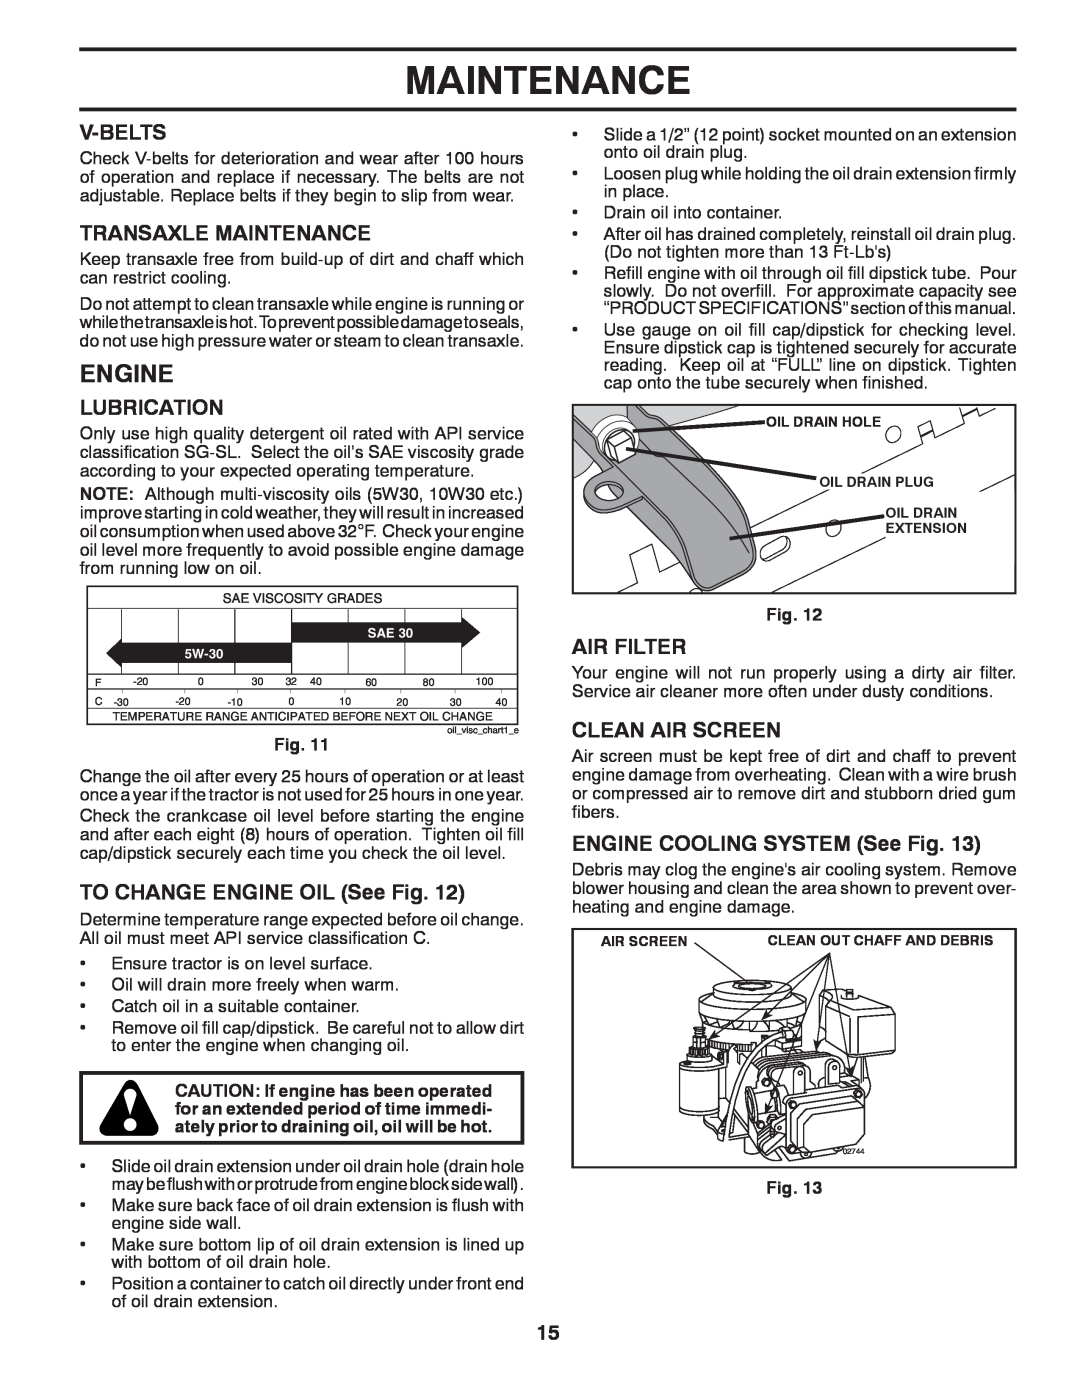 Poulan 532 43 88-17 Engine, V-Belts, Transaxle Maintenance, Lubrication, TO CHANGE ENGINE OIL See Fig, Air Filter 